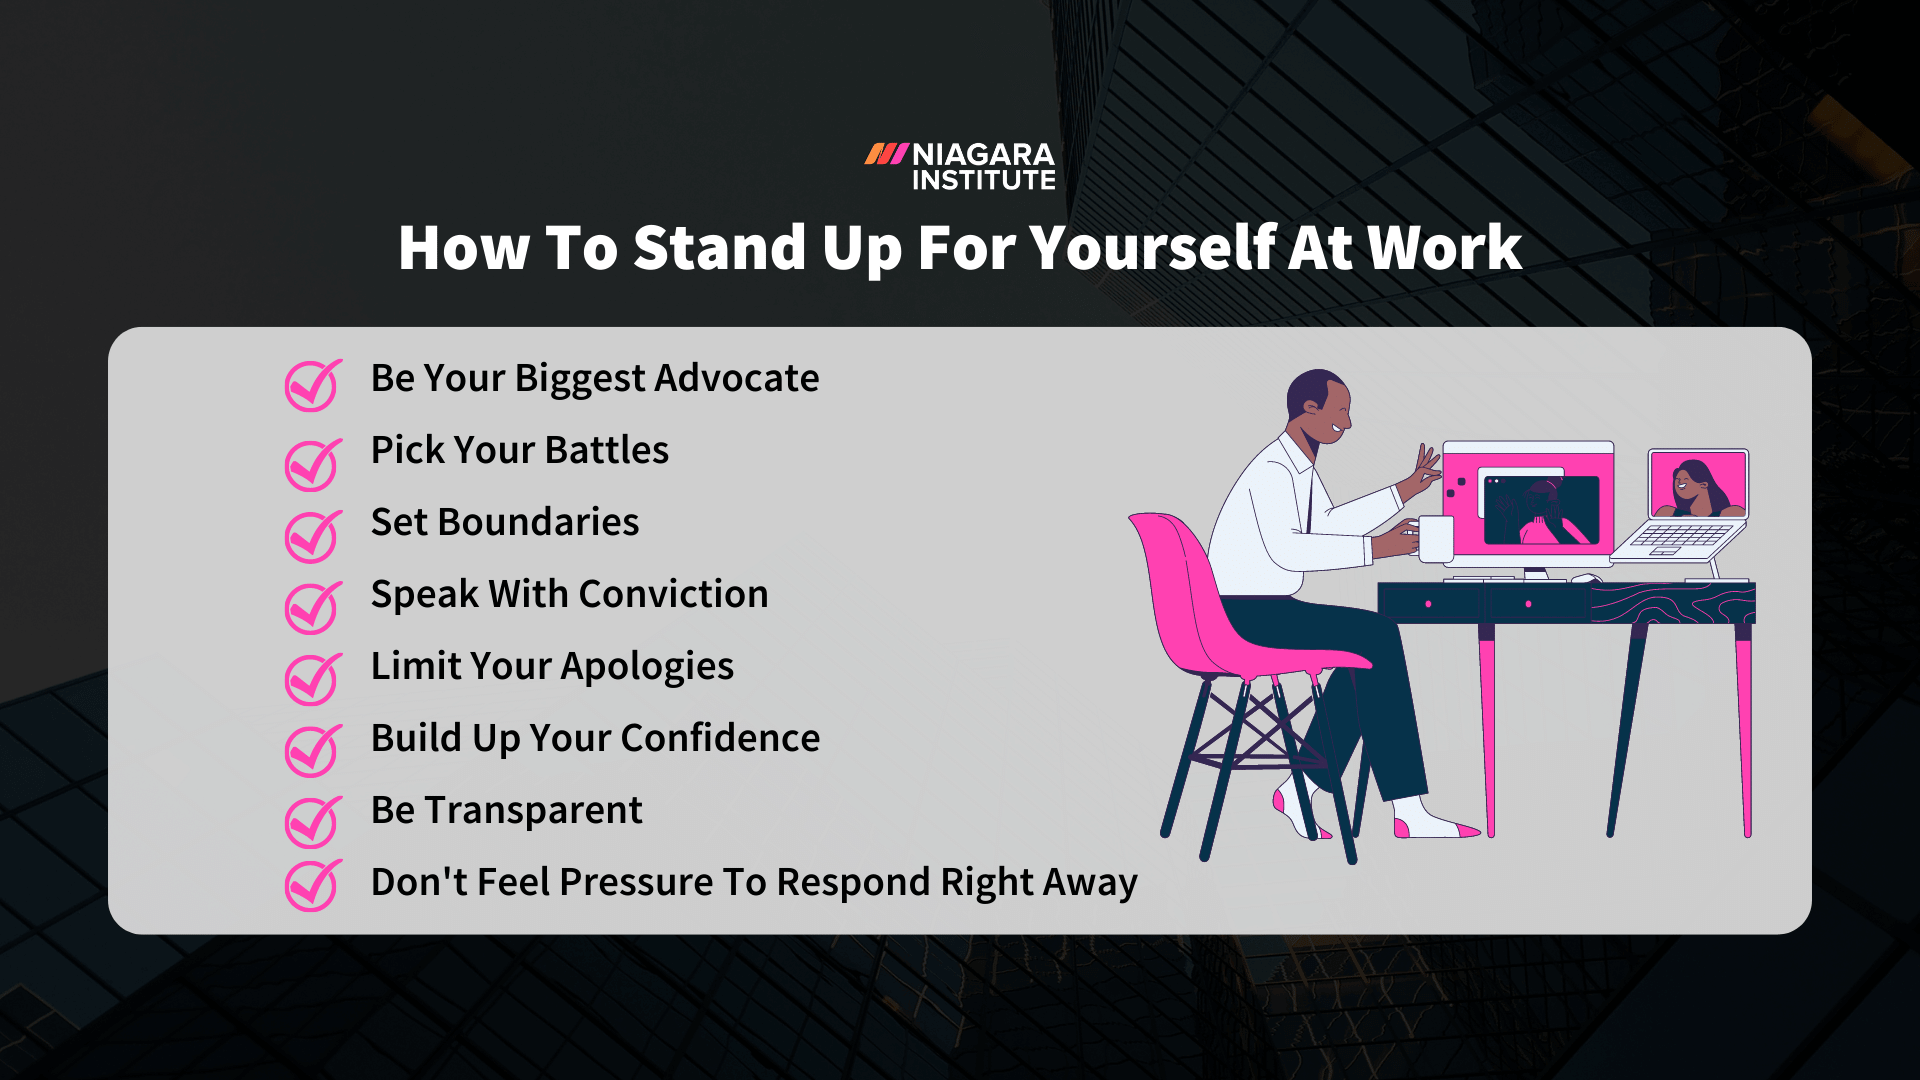 How To Stand Up For Yourself - Niagara Institute (1)